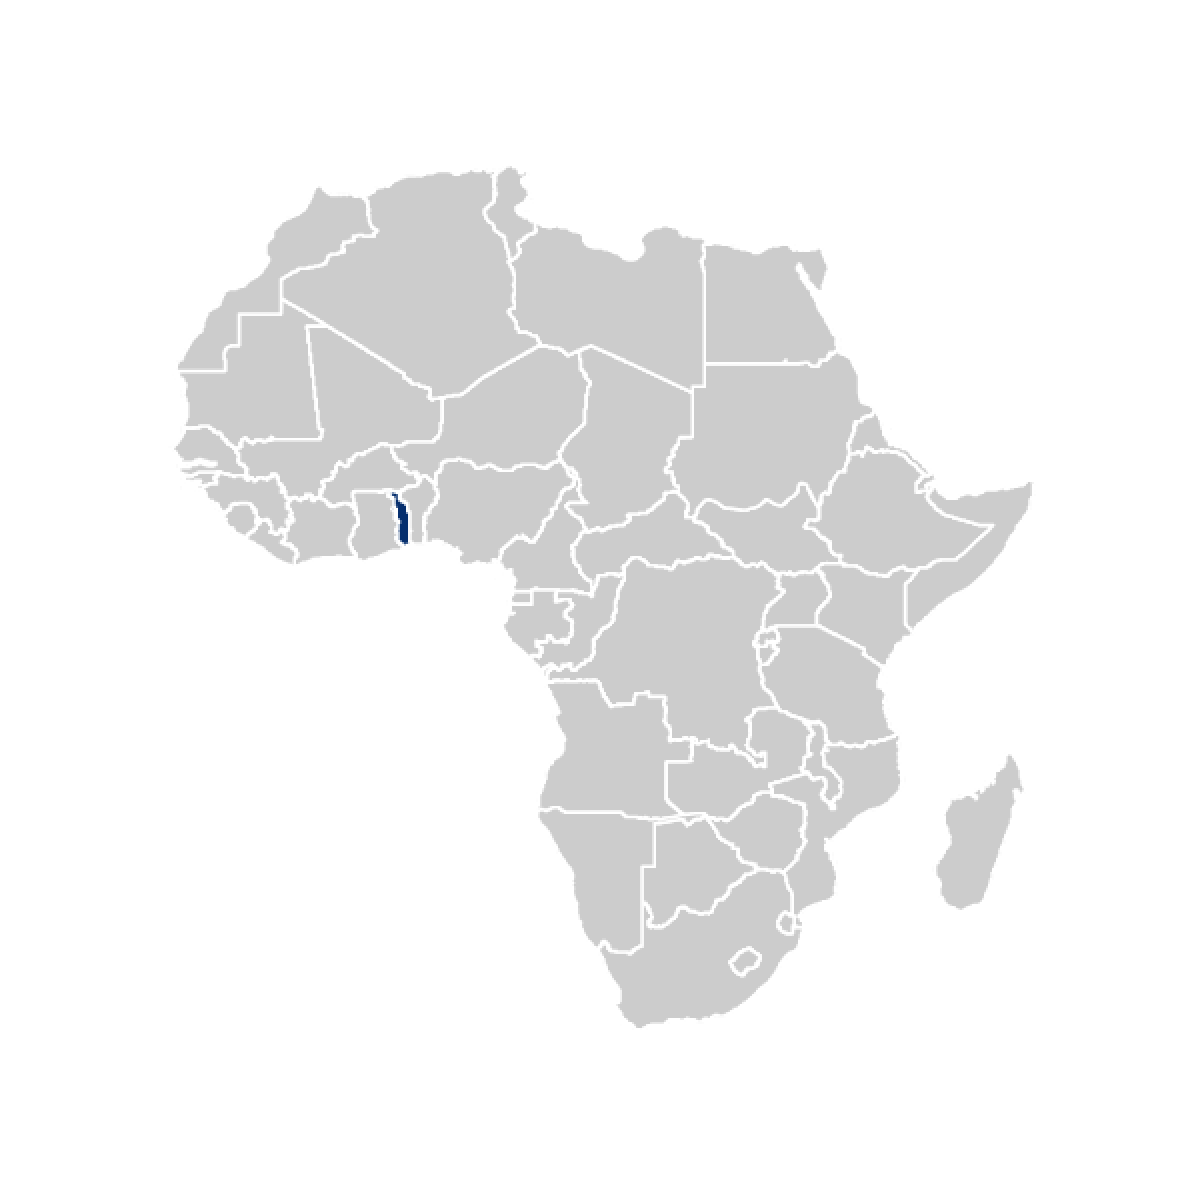 Togo highlighted in Africa map